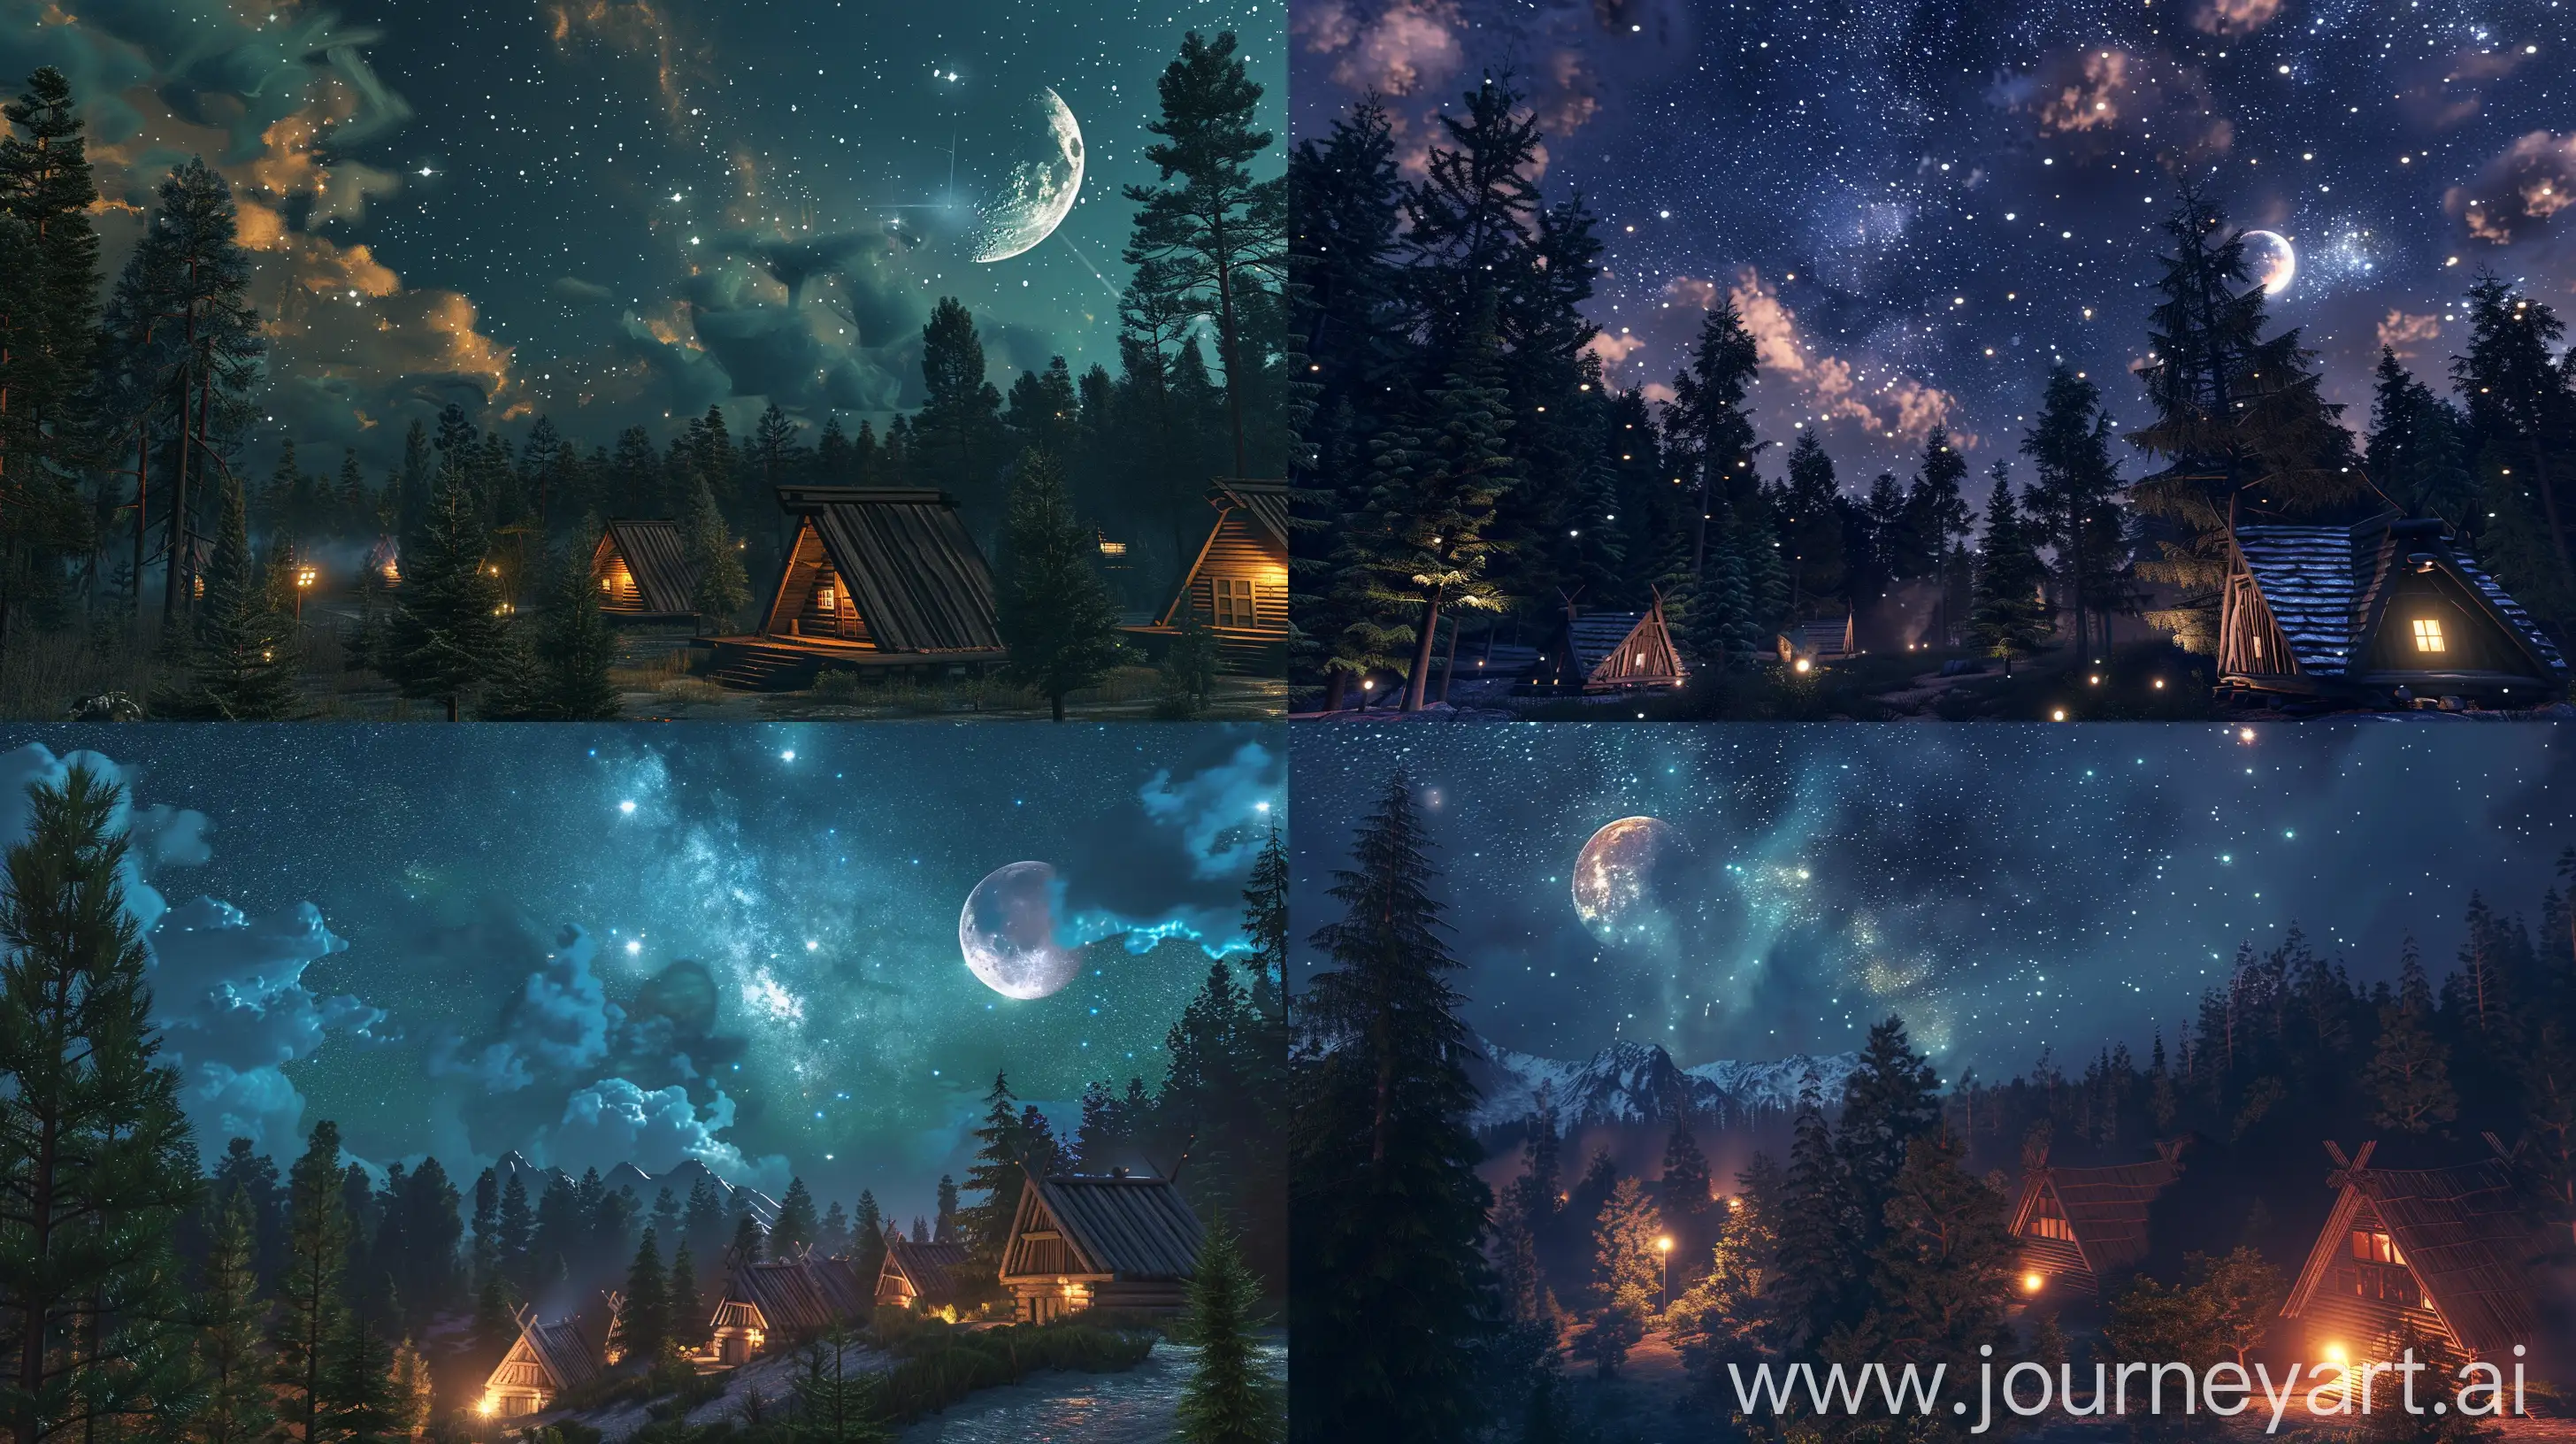 Enchanting-Night-Landscape-with-Moonlit-Forest-and-Wooden-Huts